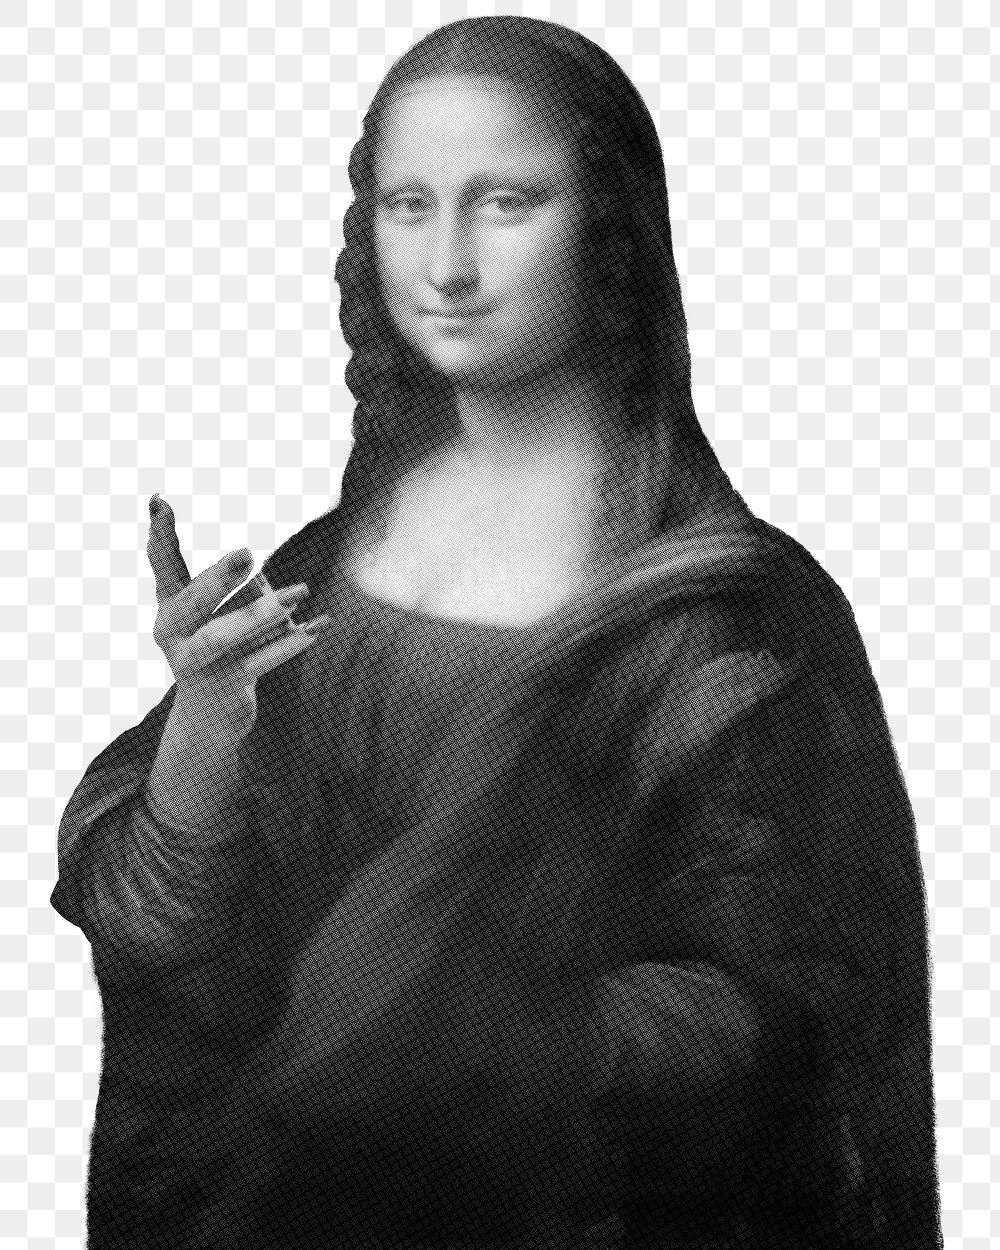 Mona Lisa png greyscale sticker, Da Vinci's famous artwork, remixed by rawpixel, transparent background